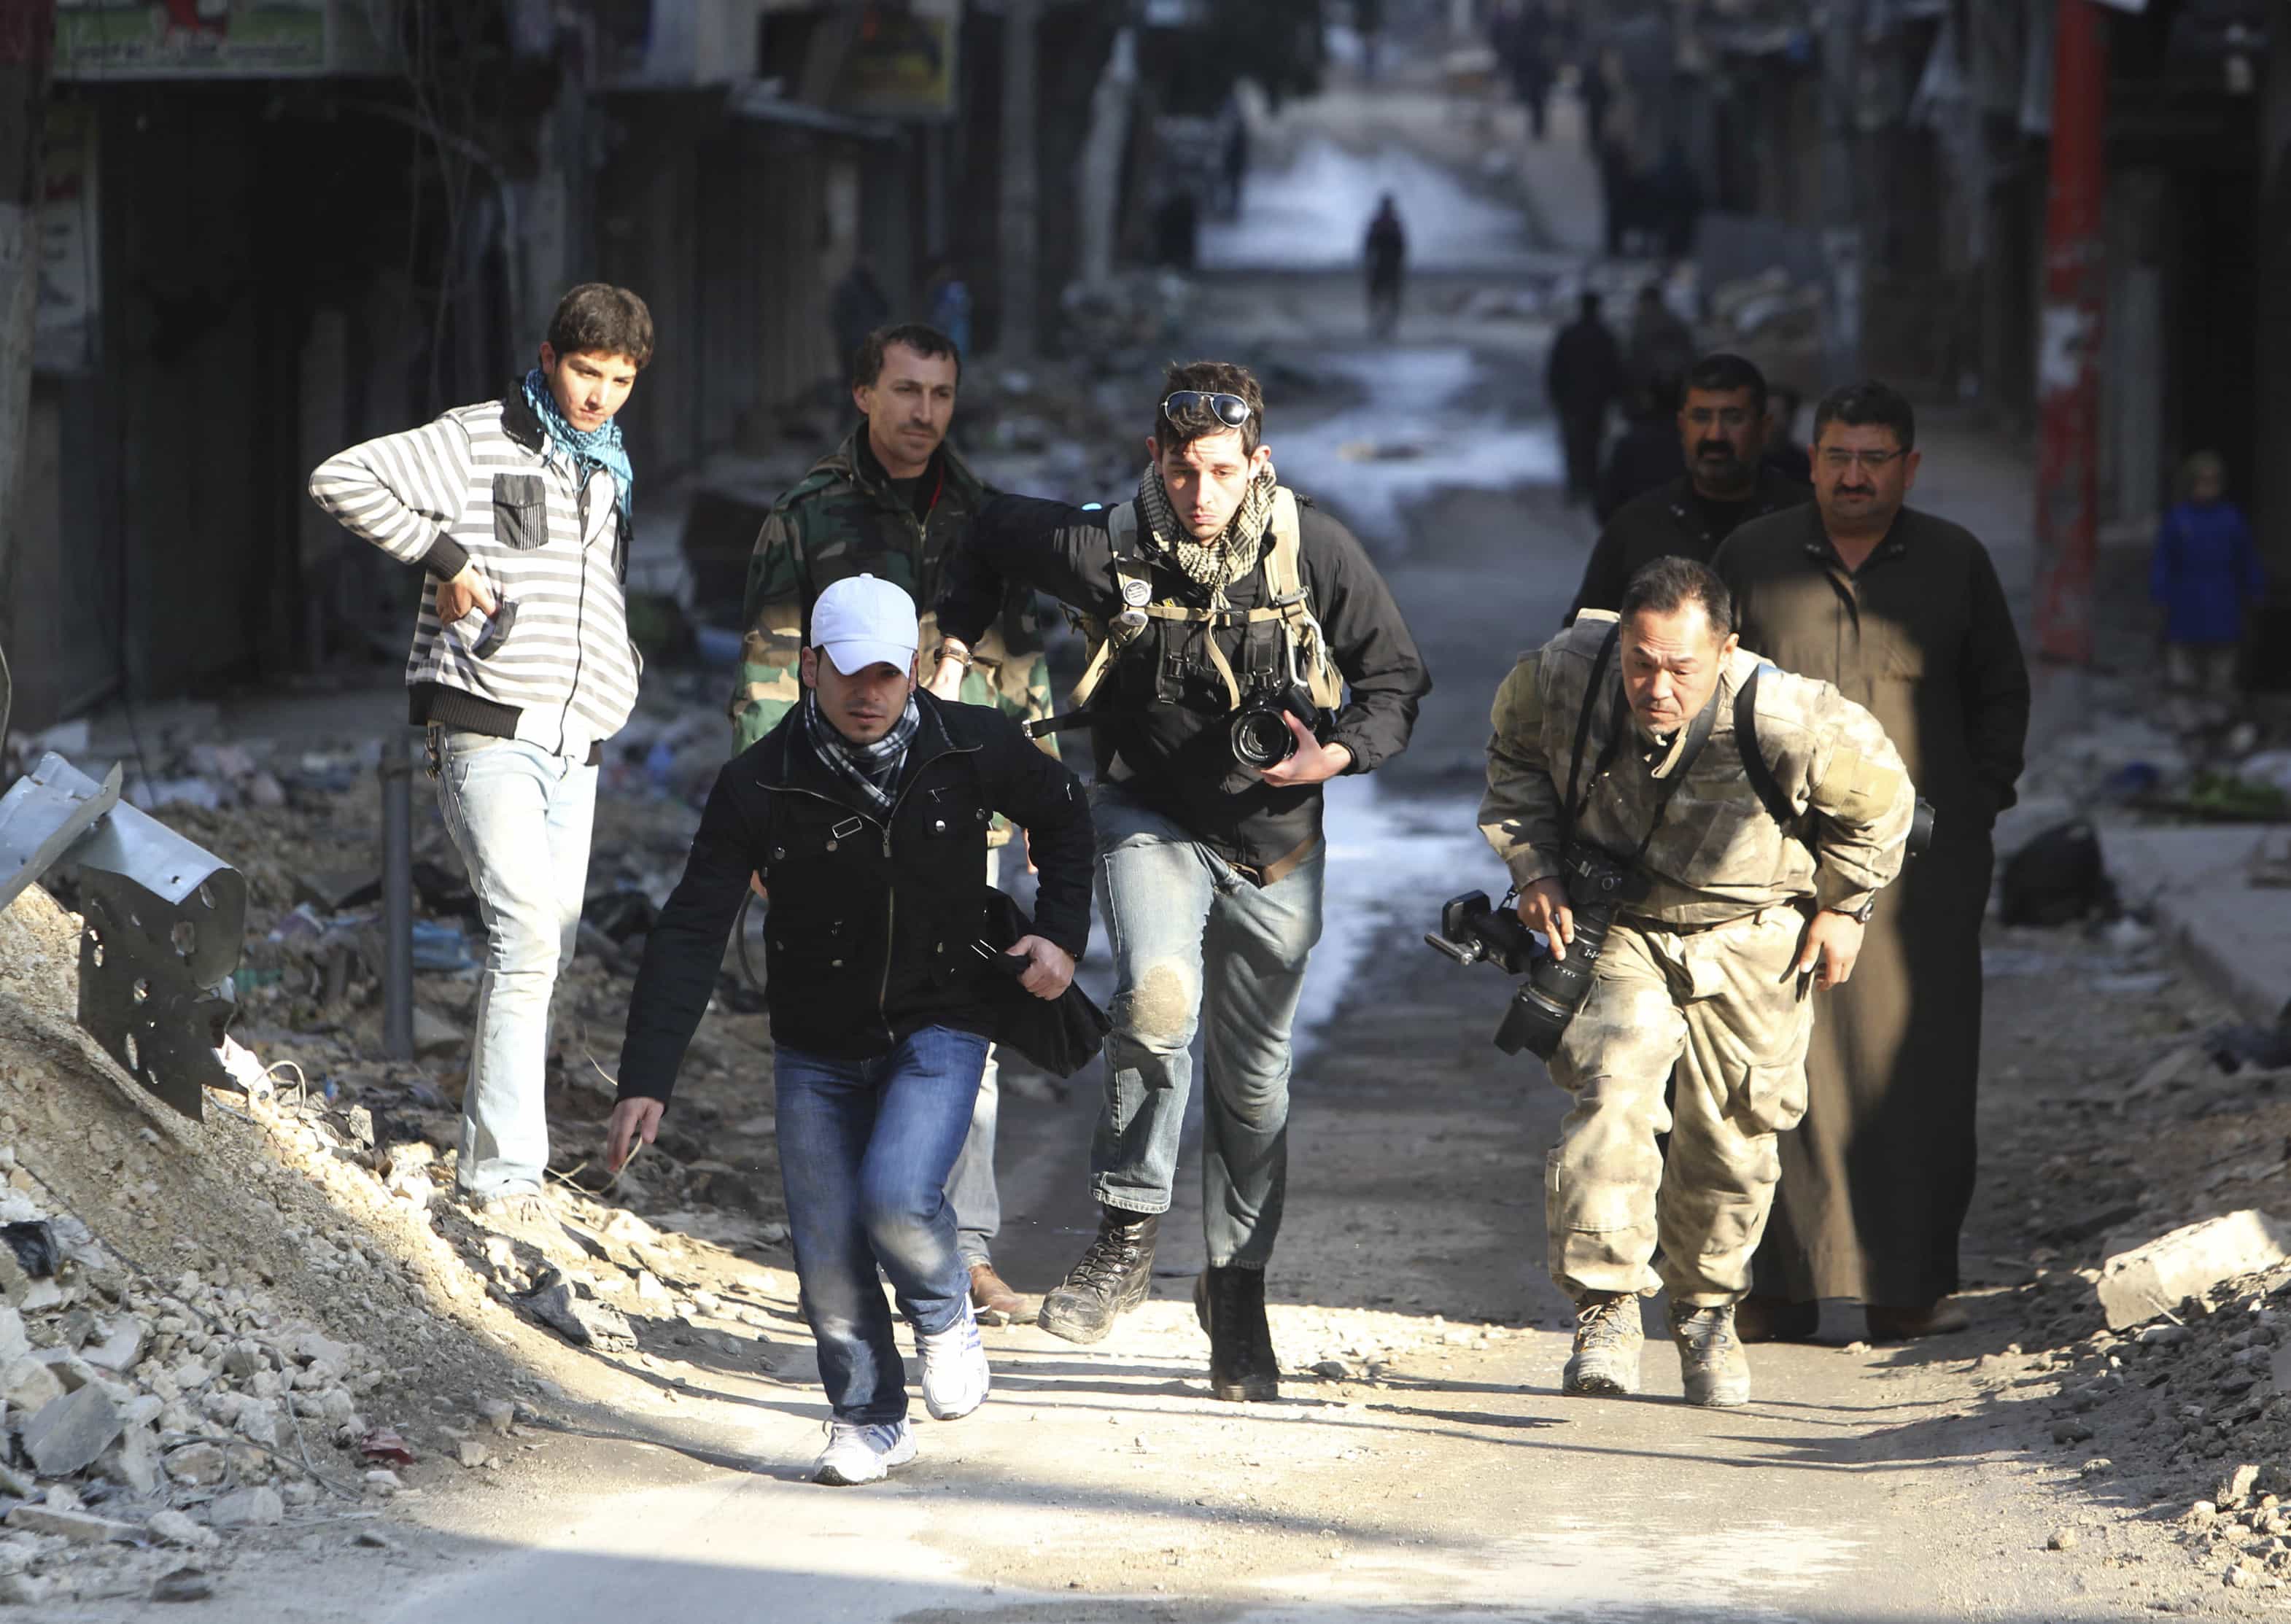 In this December 2012 photo, journalists Bryn Karcha (C) of Canada and Toshifumi Fujimoto (R) of Japan run for cover next to an unidentified fixer in a street in Syria, REUTERS/Muzaffar Salman